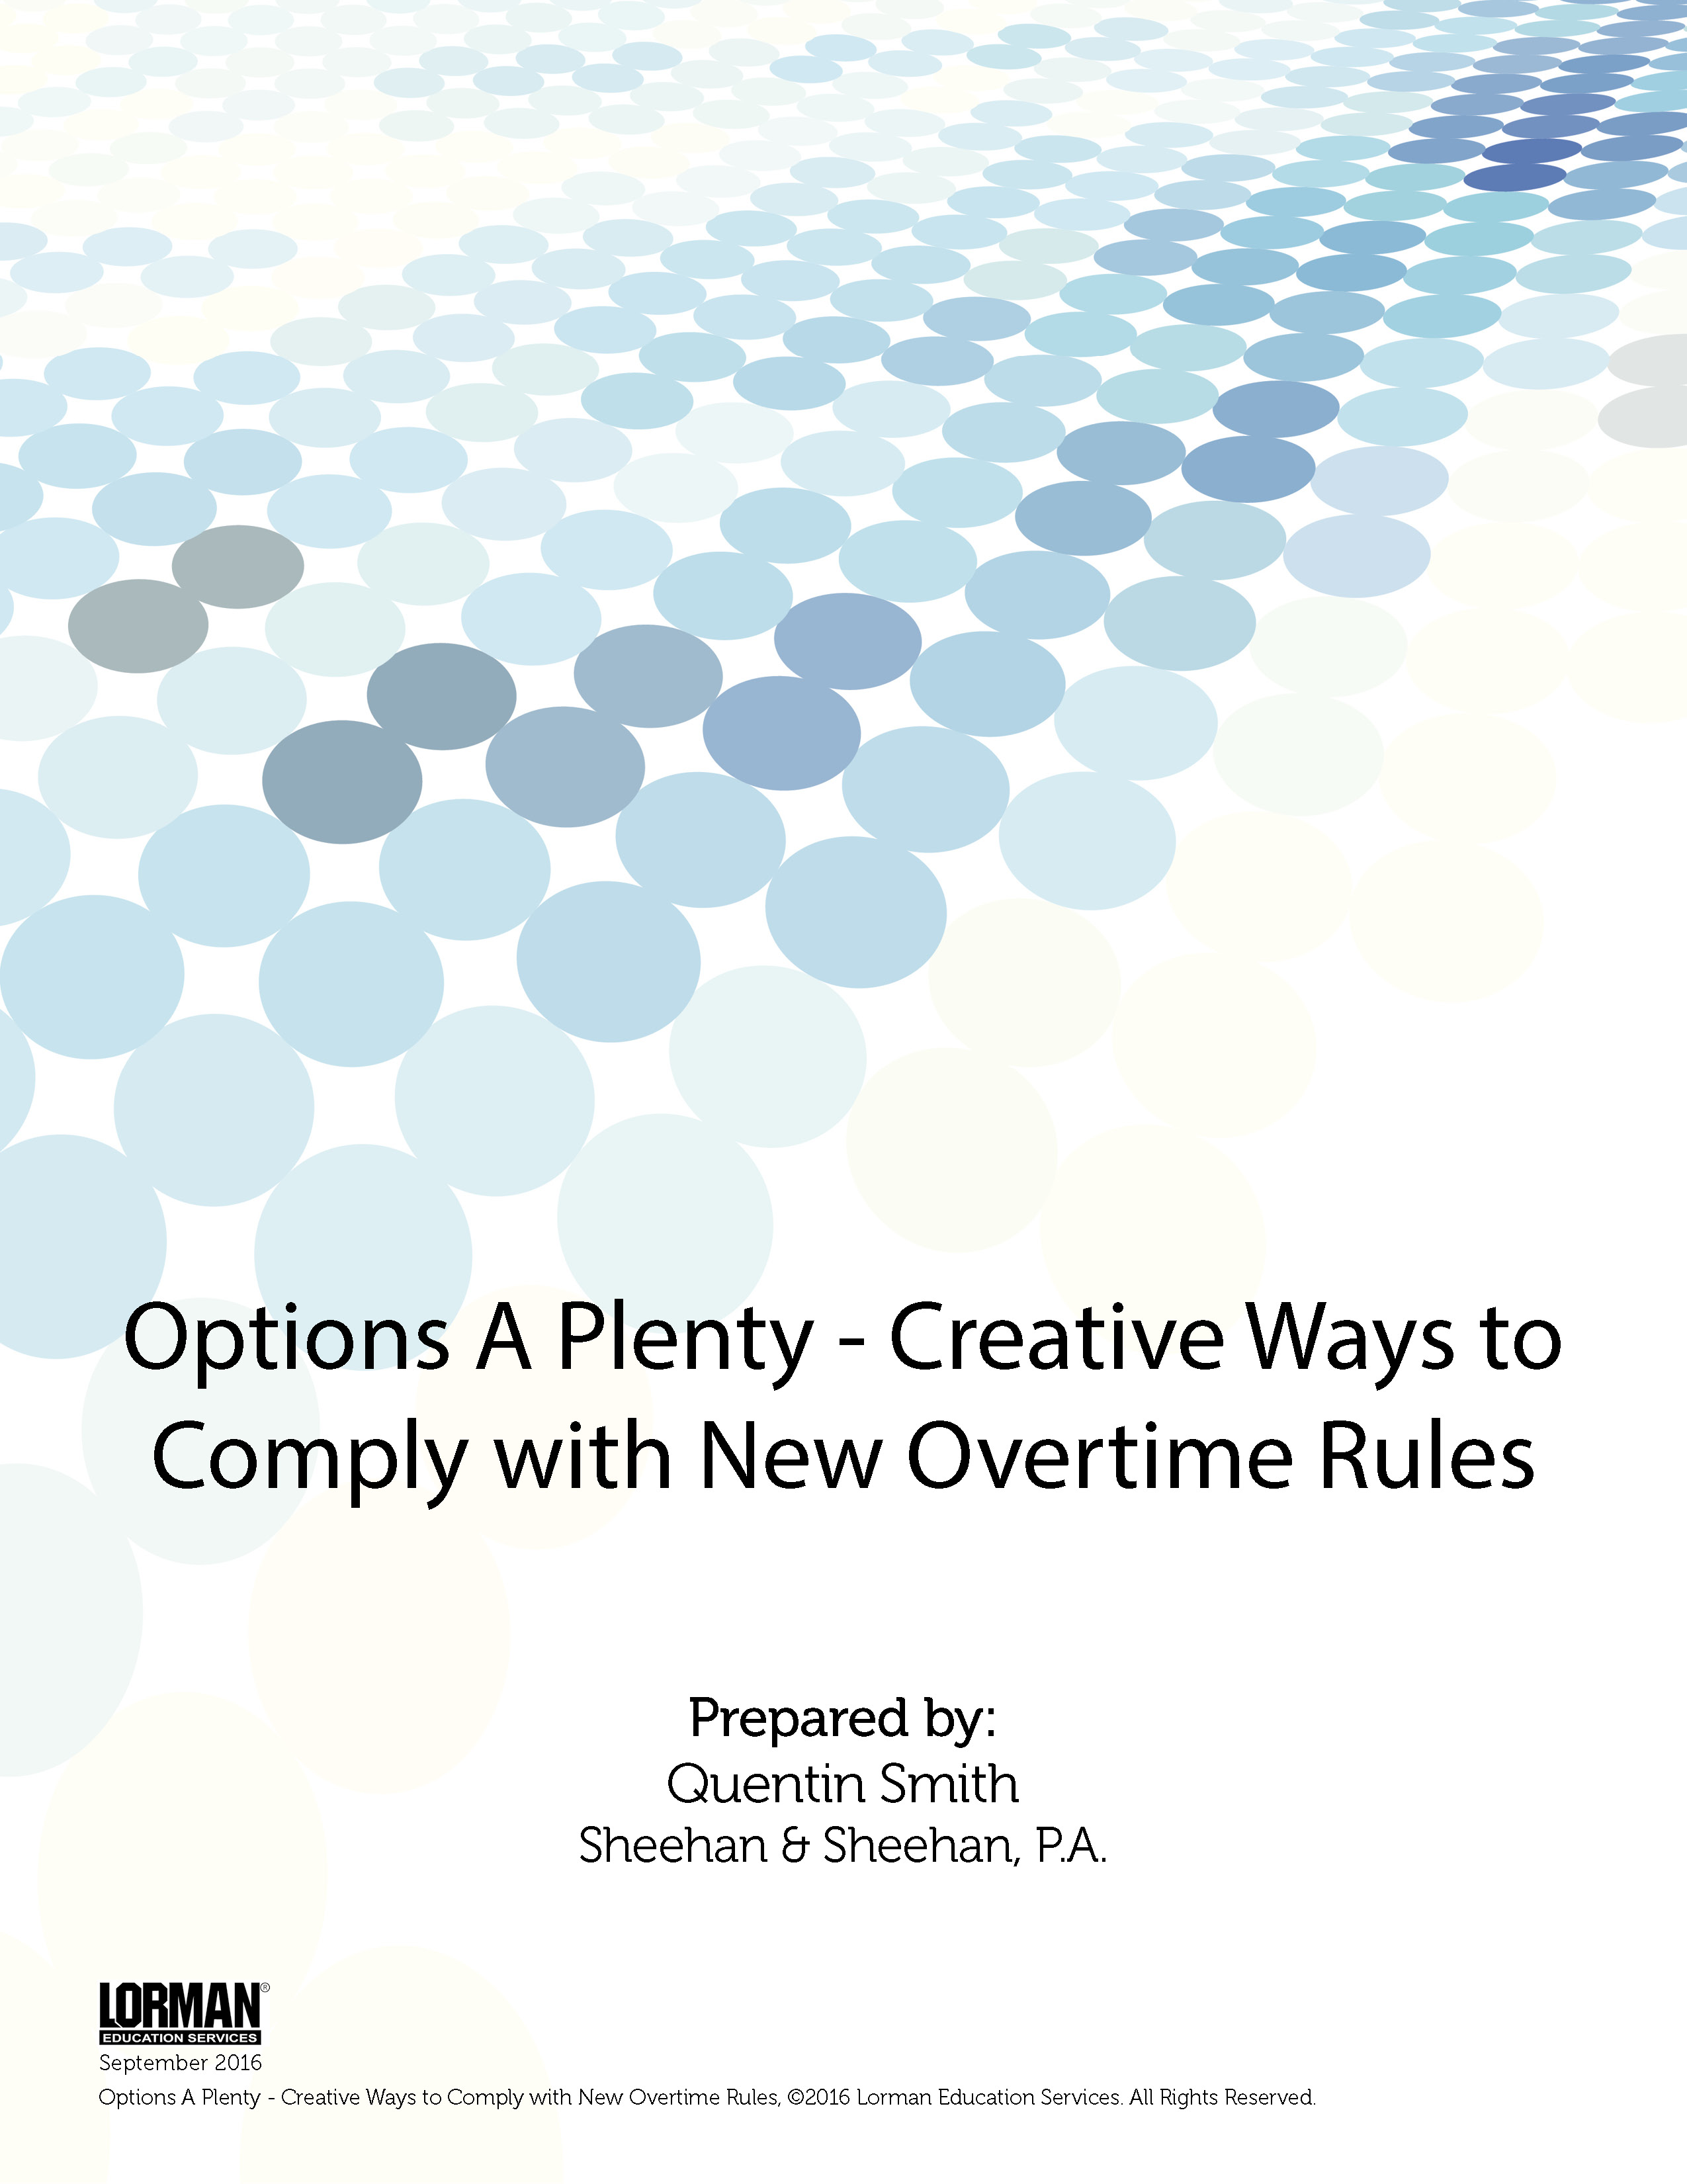 Options A Plenty - Creative Ways to Comply with New Overtime Rules